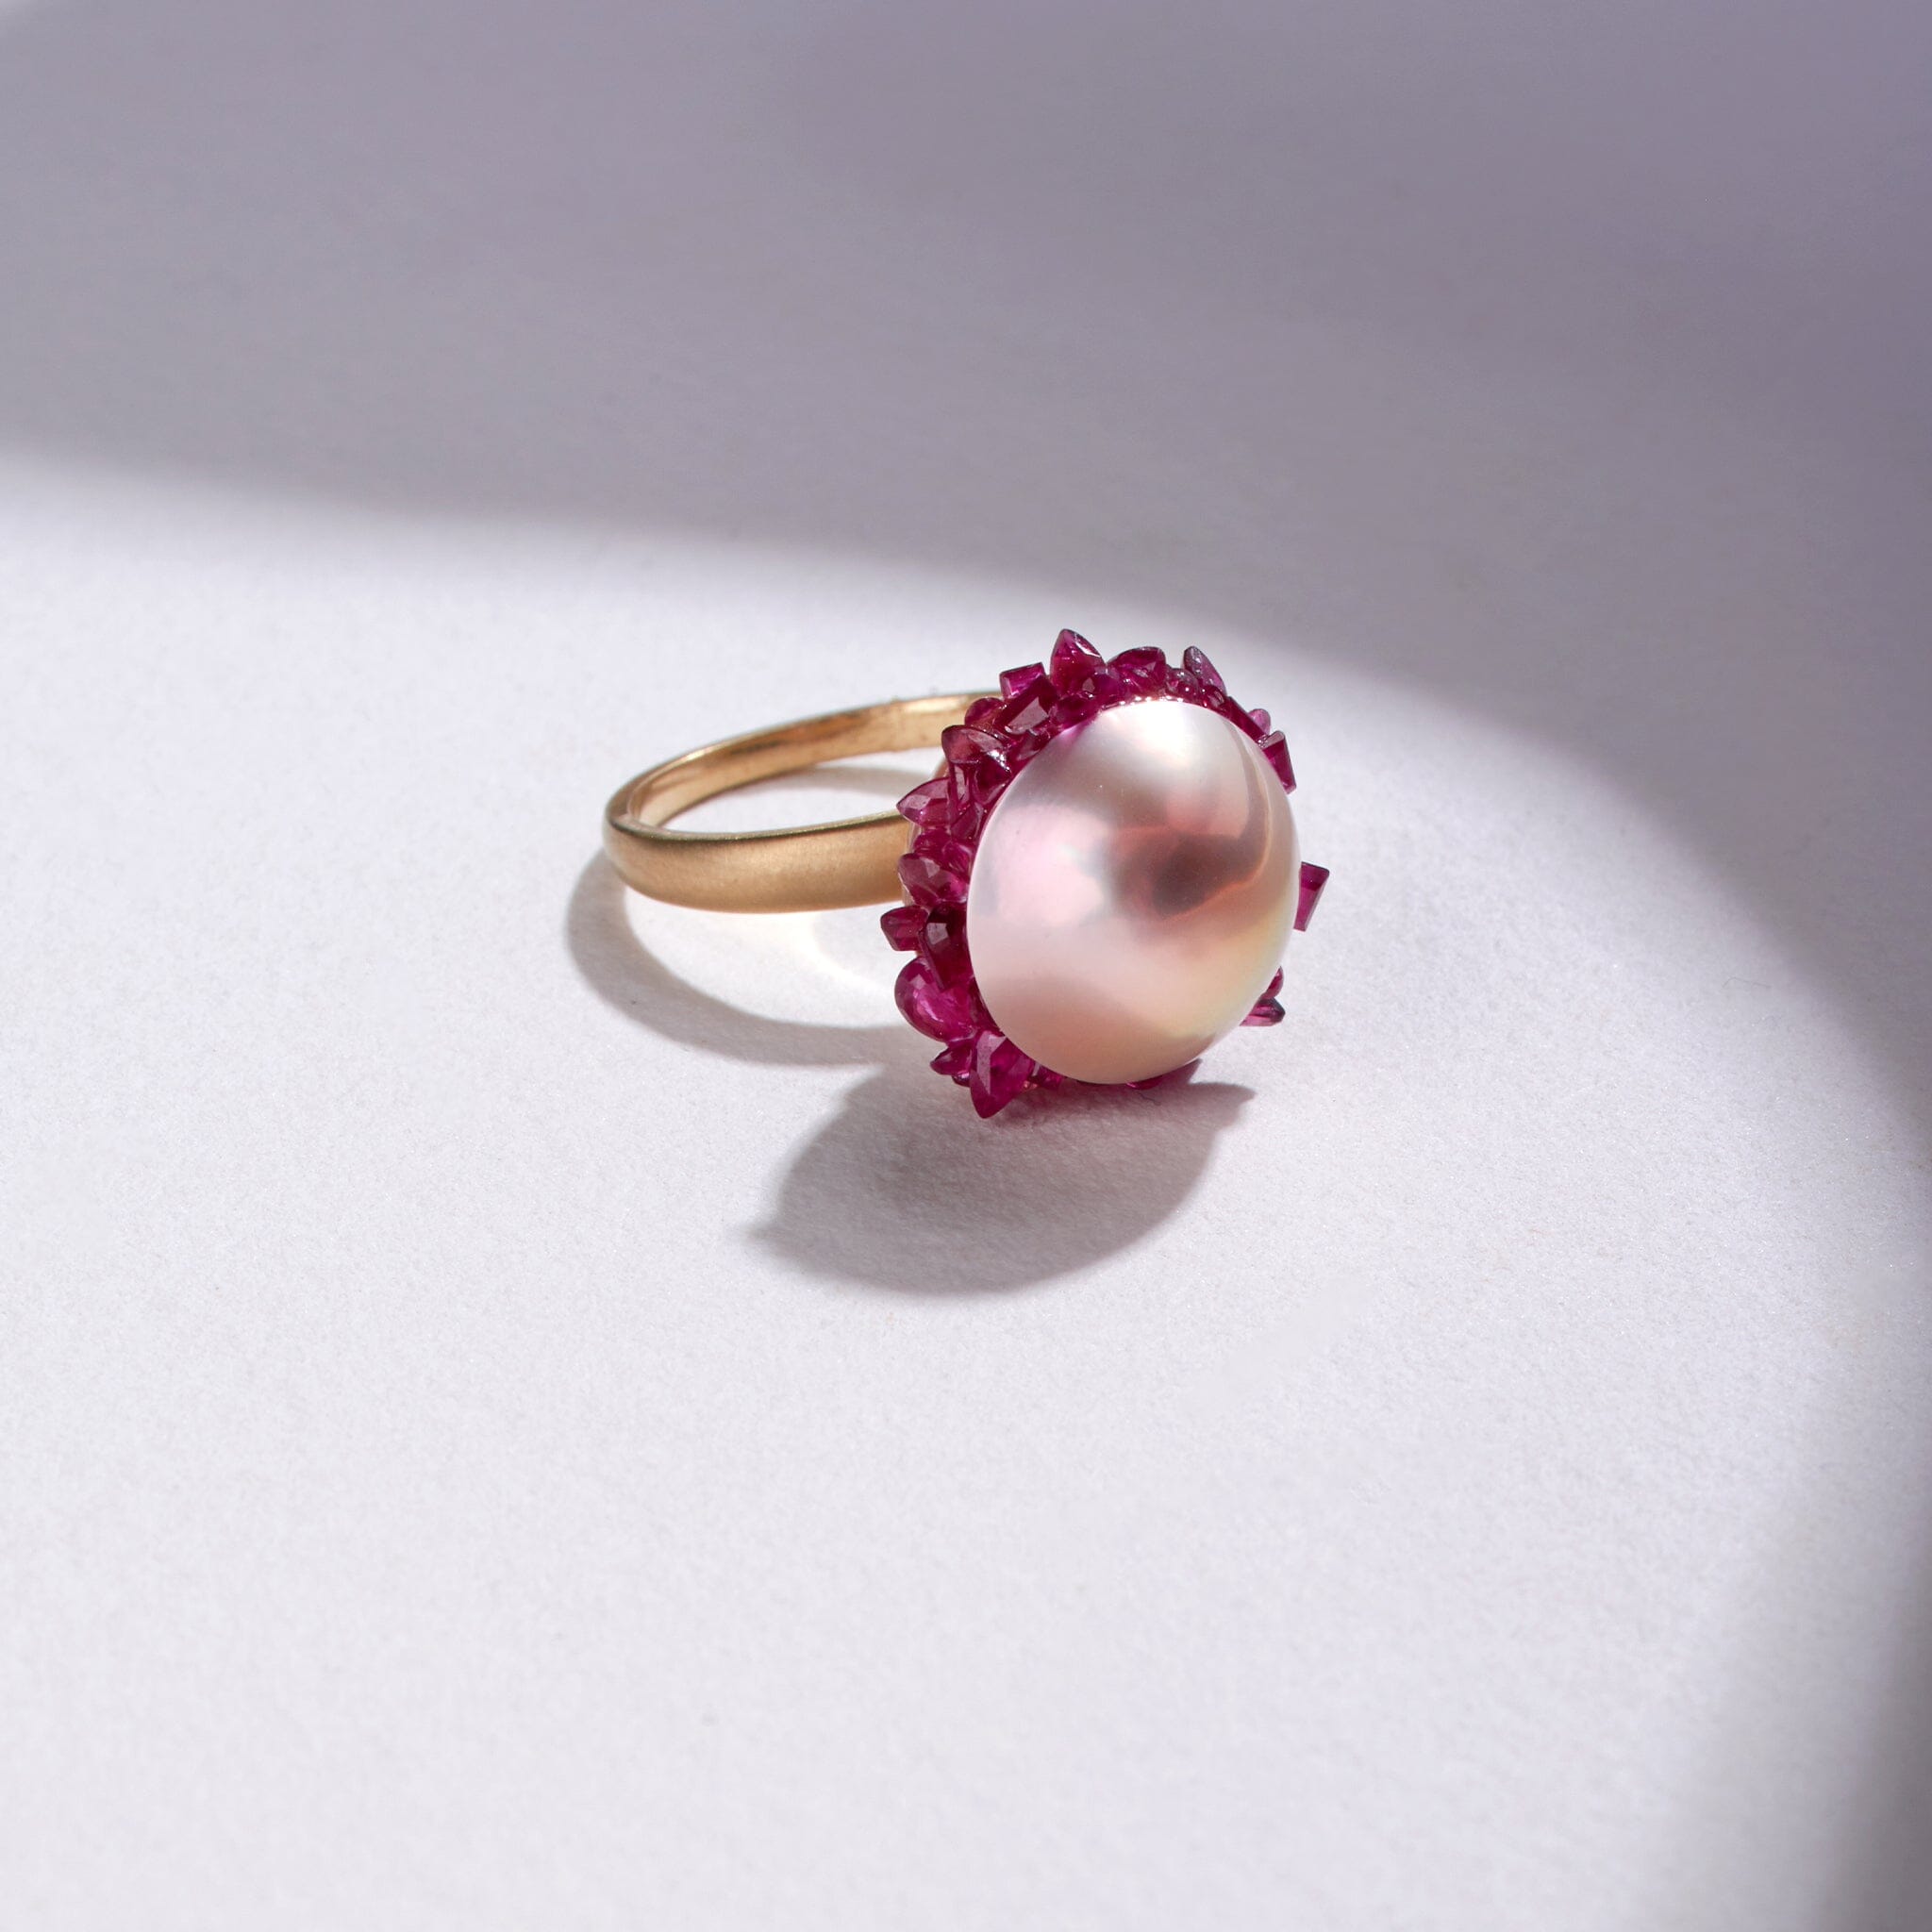 Freshwater Edison Pearl Spiral Ring with Ruby